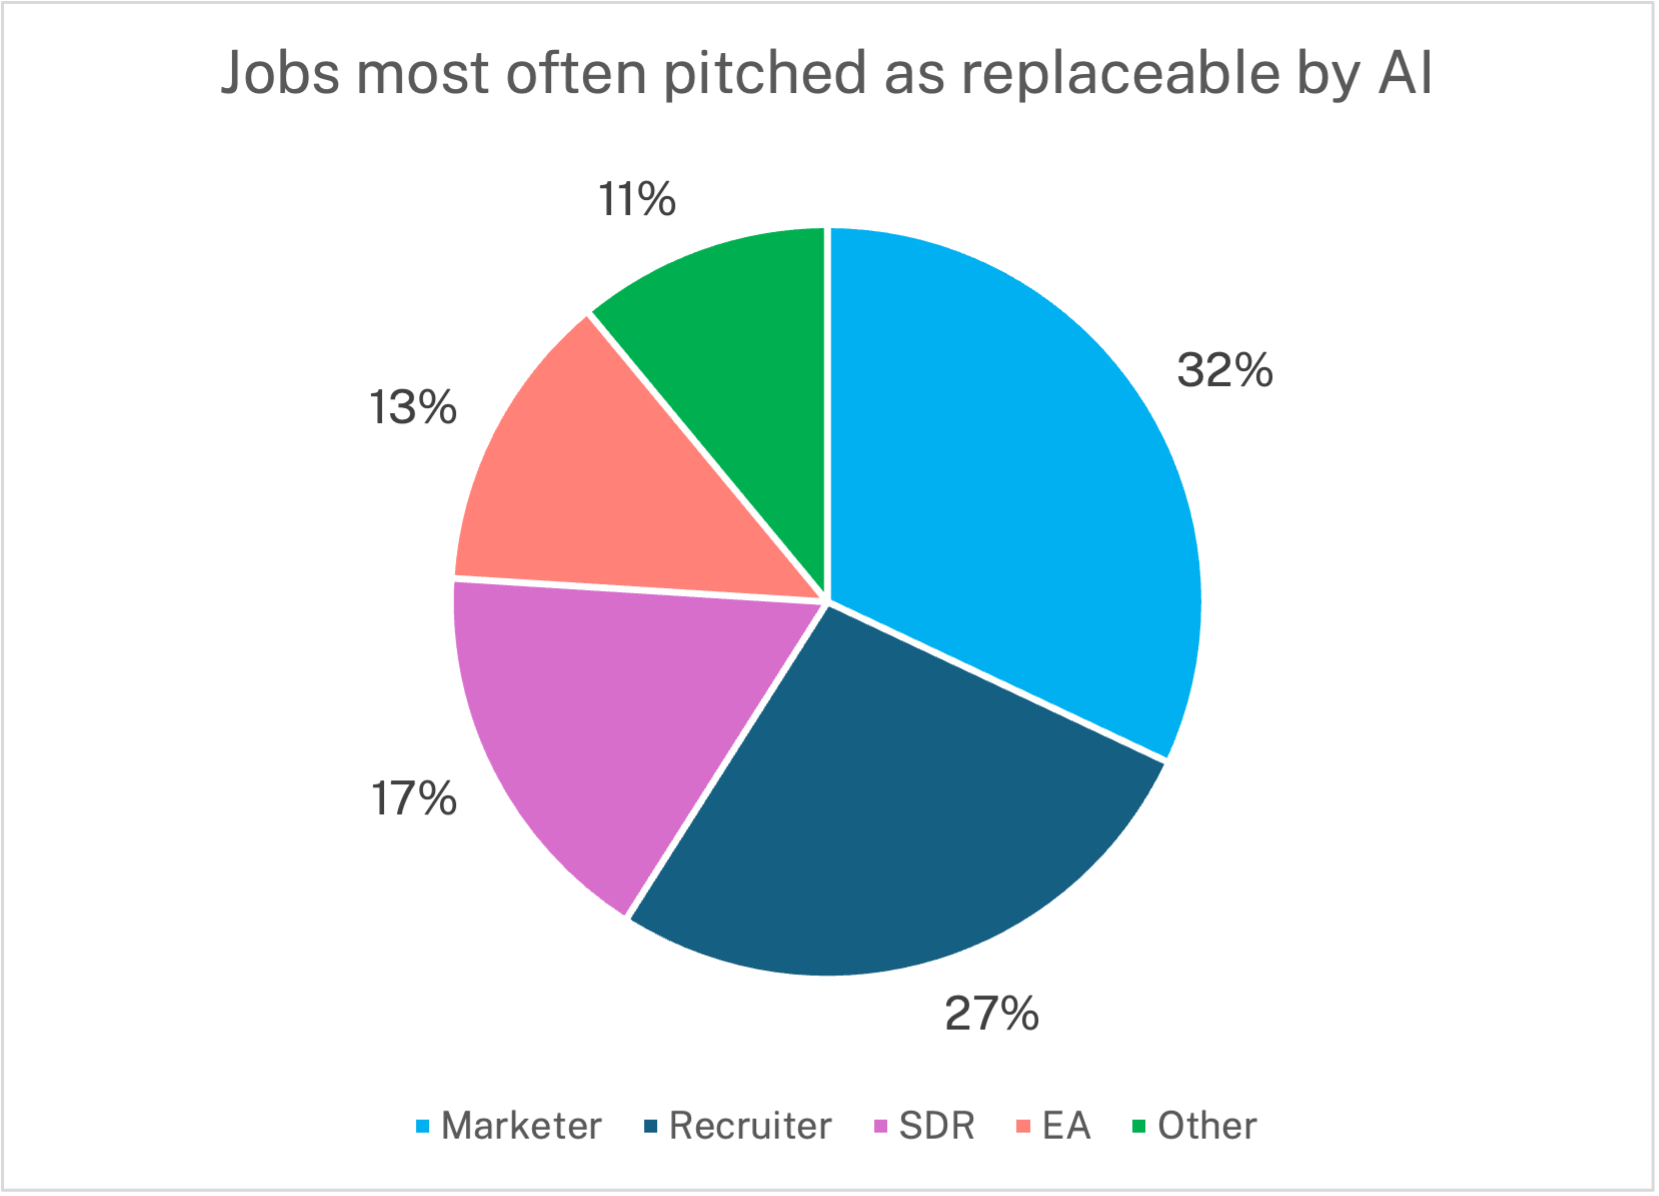 Pie chart showing the jobs most often pitched as replaceable by AIMarketer	32% Recruiter	27% SDR	17% EA	13% Other	11%